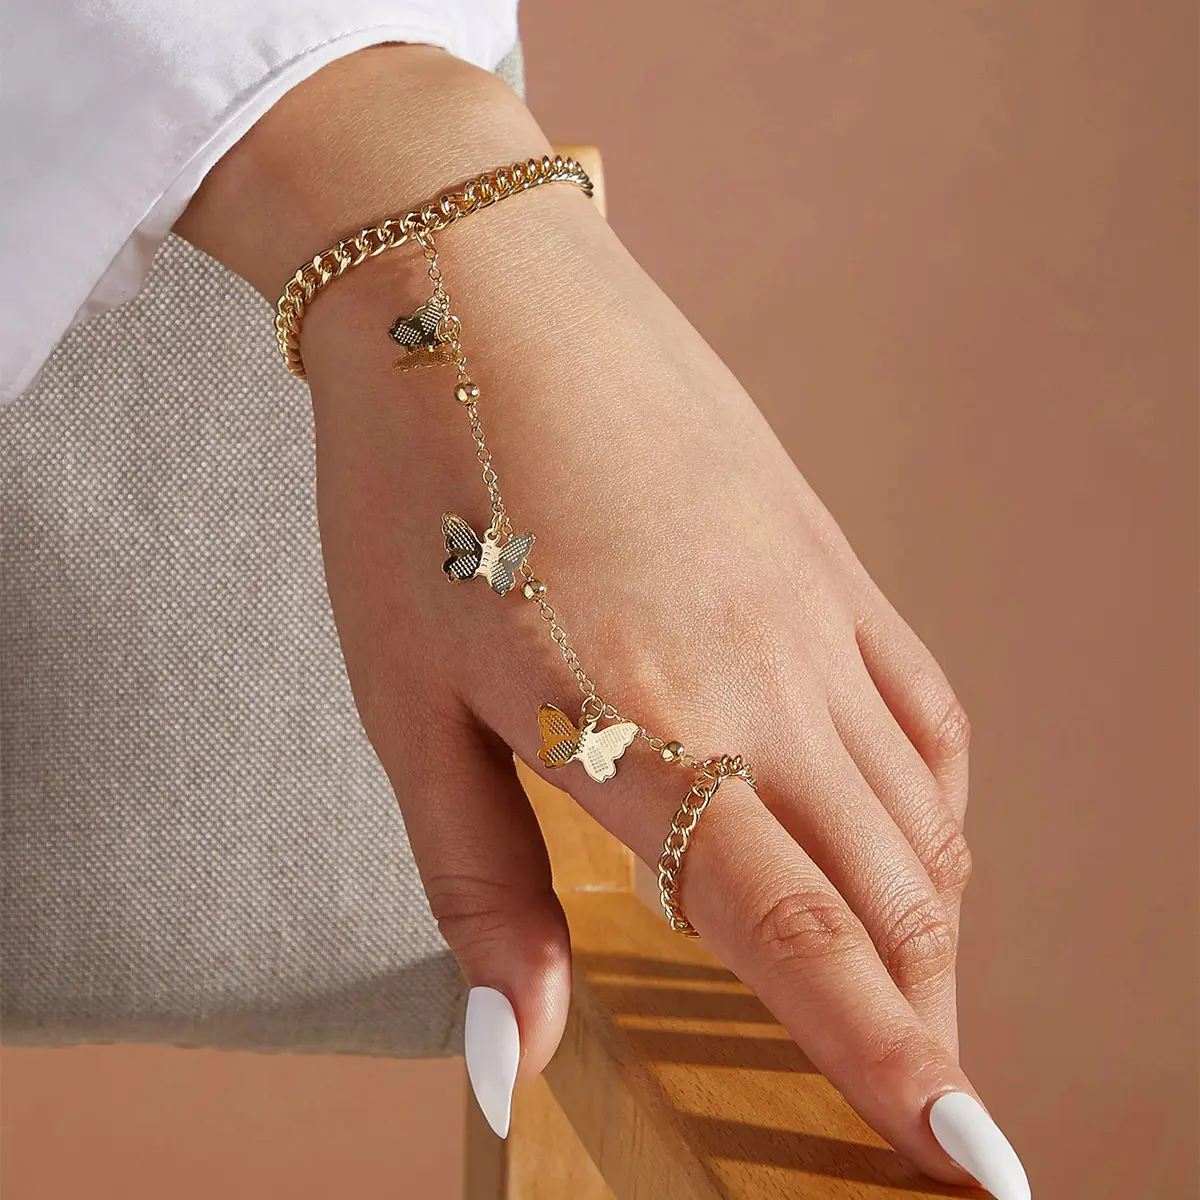 Simple Cute Butterfly Pendant Chain Bracelet Trendy Exquisite Connected Finger Bracelets for Women Hand Accessories Girls